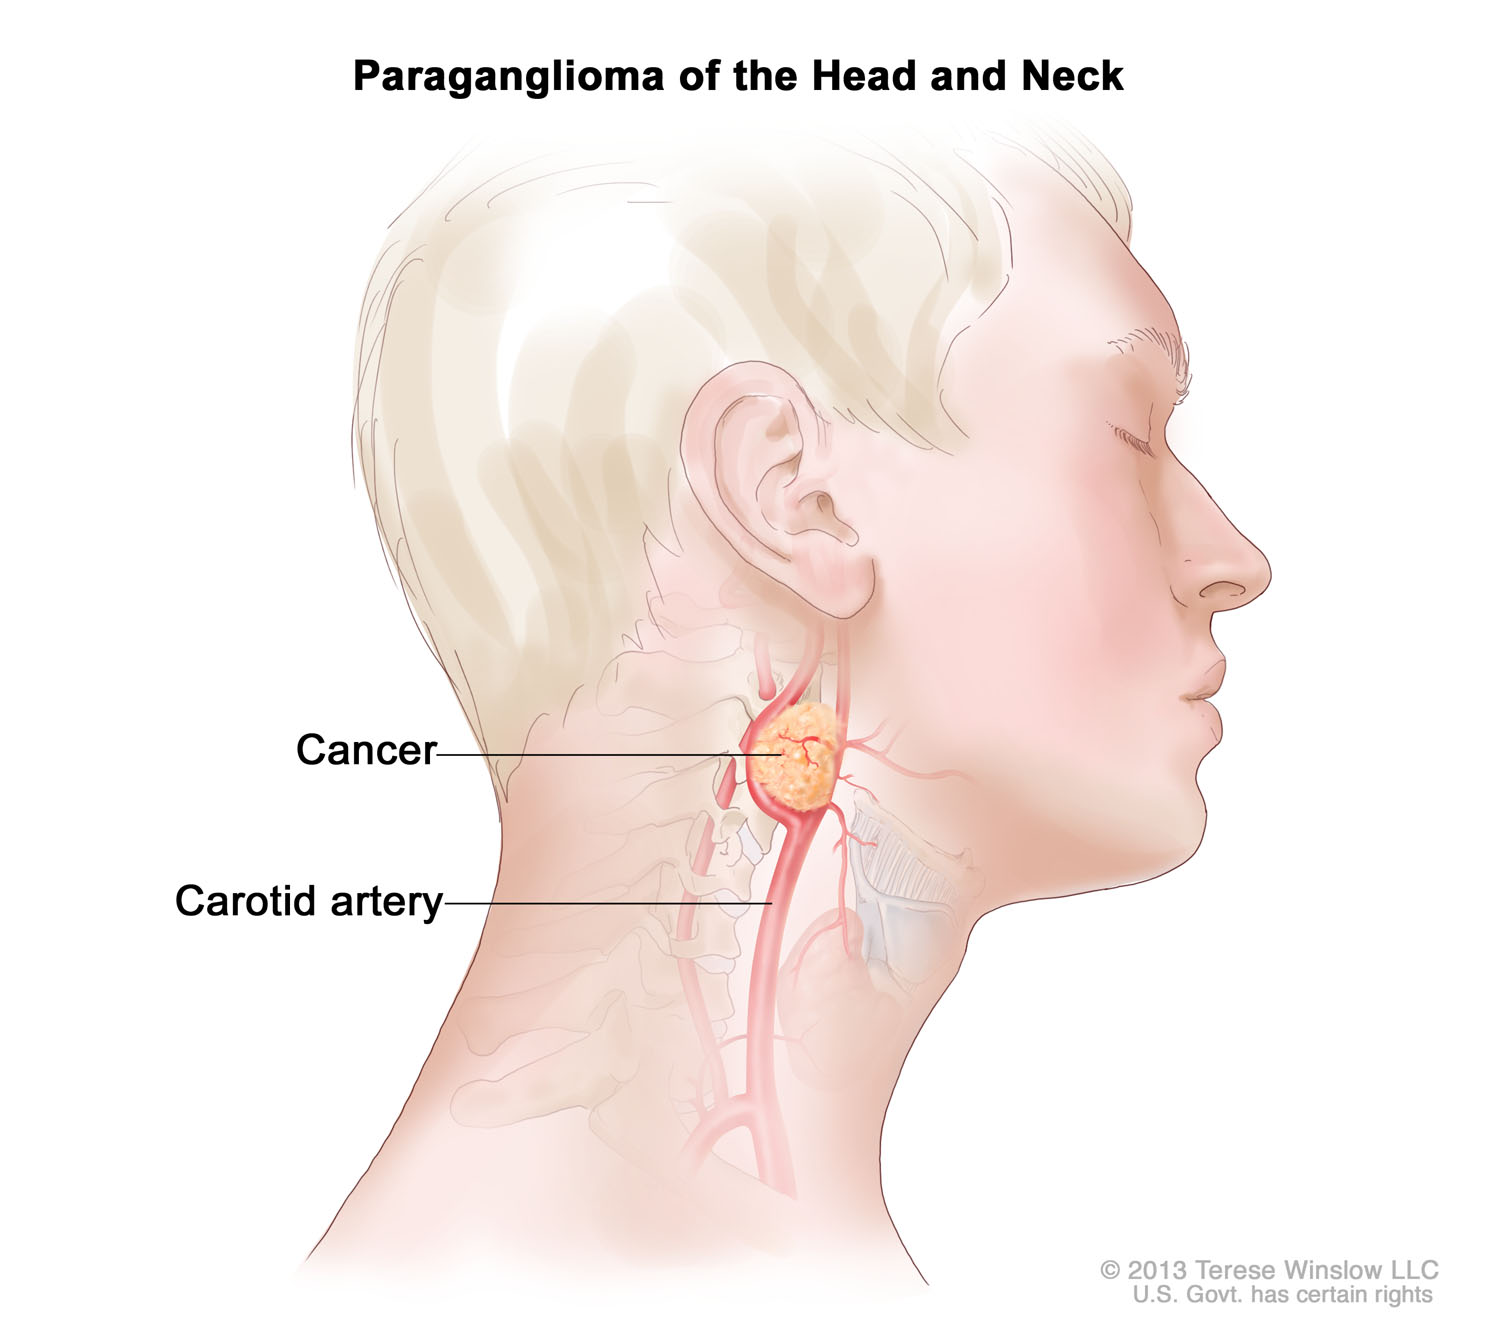 Paraganglioma of the Head and Neck